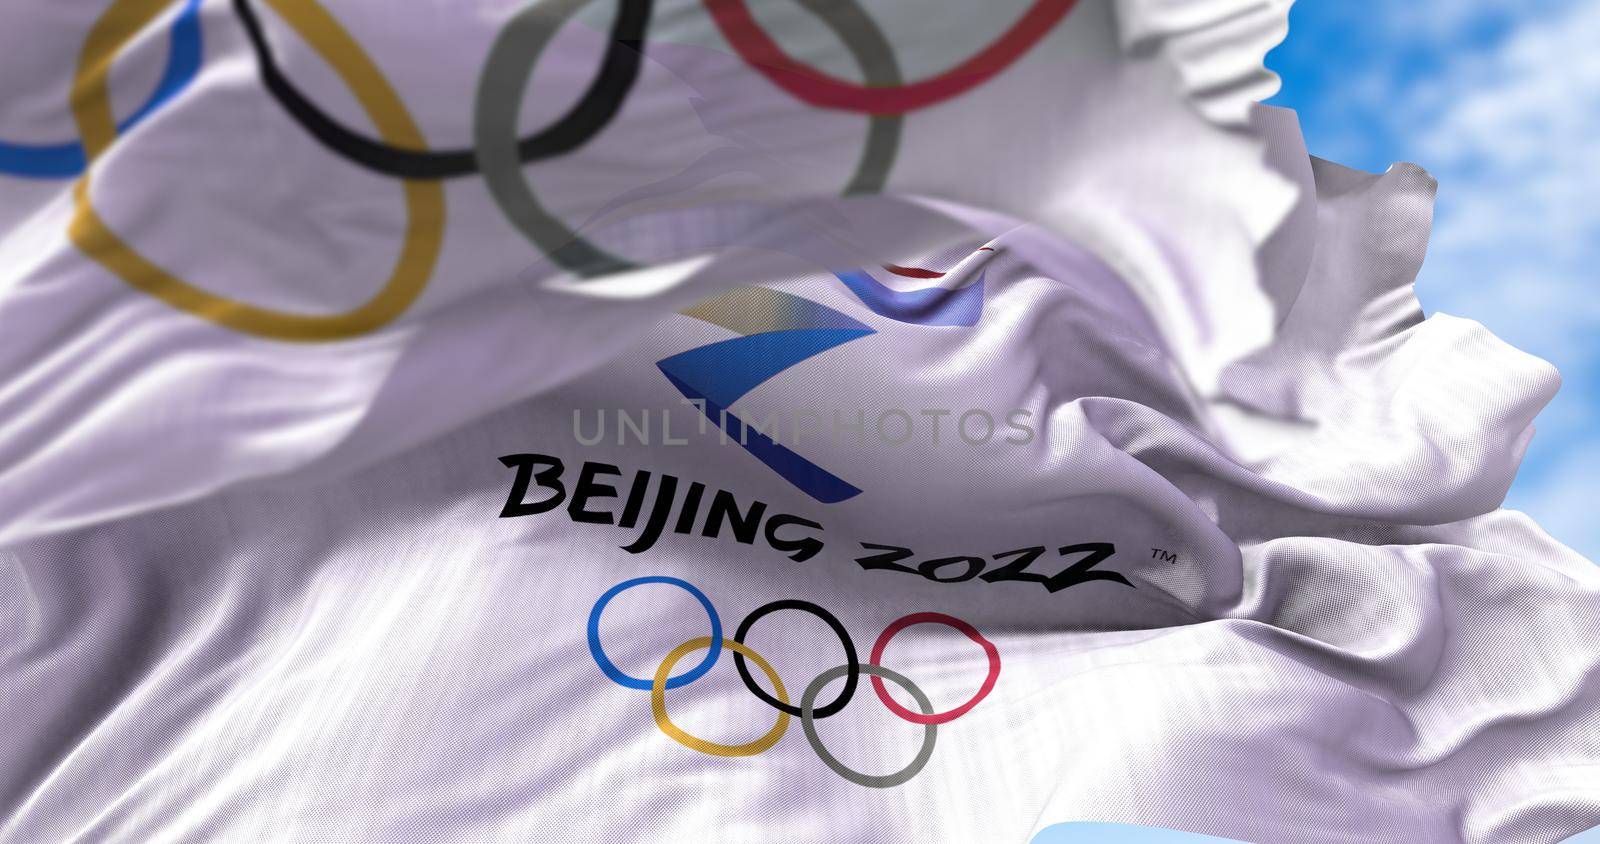 Beijing, CHN, Jan. 2022: Beijing 2022 flag waving in the wind with the Olympic flag blurred in the foreground. Beijing 2022 winter olympics games are scheduled to take place from 4 to 20 February 2022